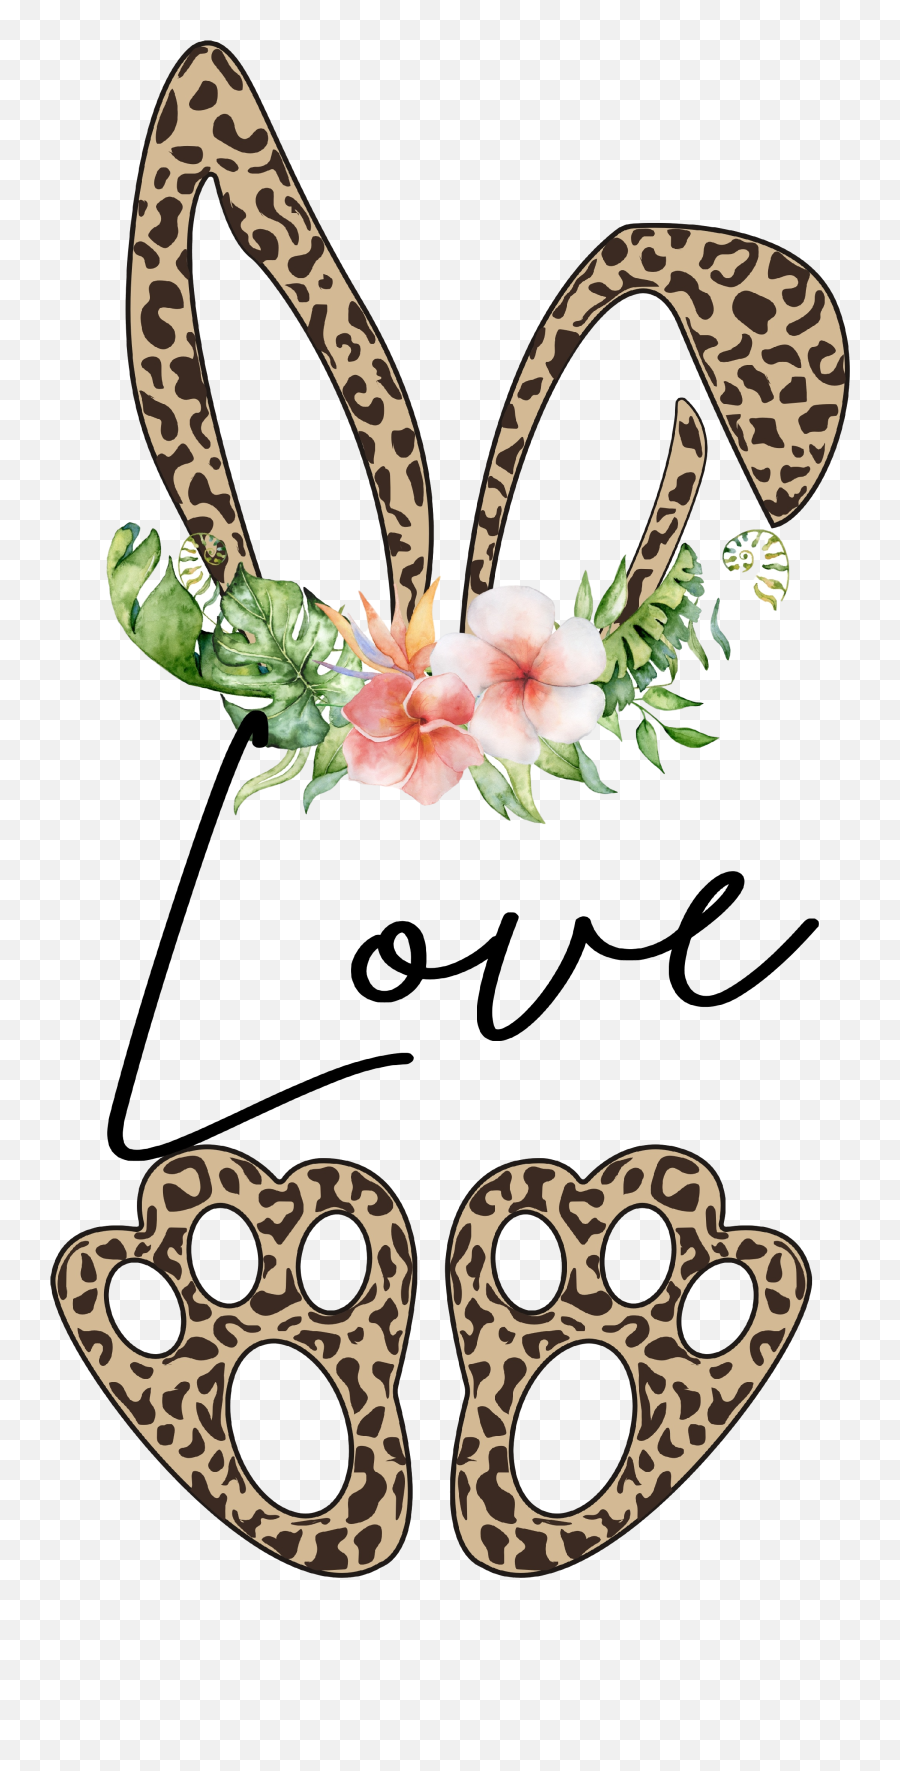 Love Bunny Ears And Feet With Various Floral Crowns Custom Text Request Are Welcomed Easter Faith Hope - Love Animal Print Png Emoji,Bunny Ears Png